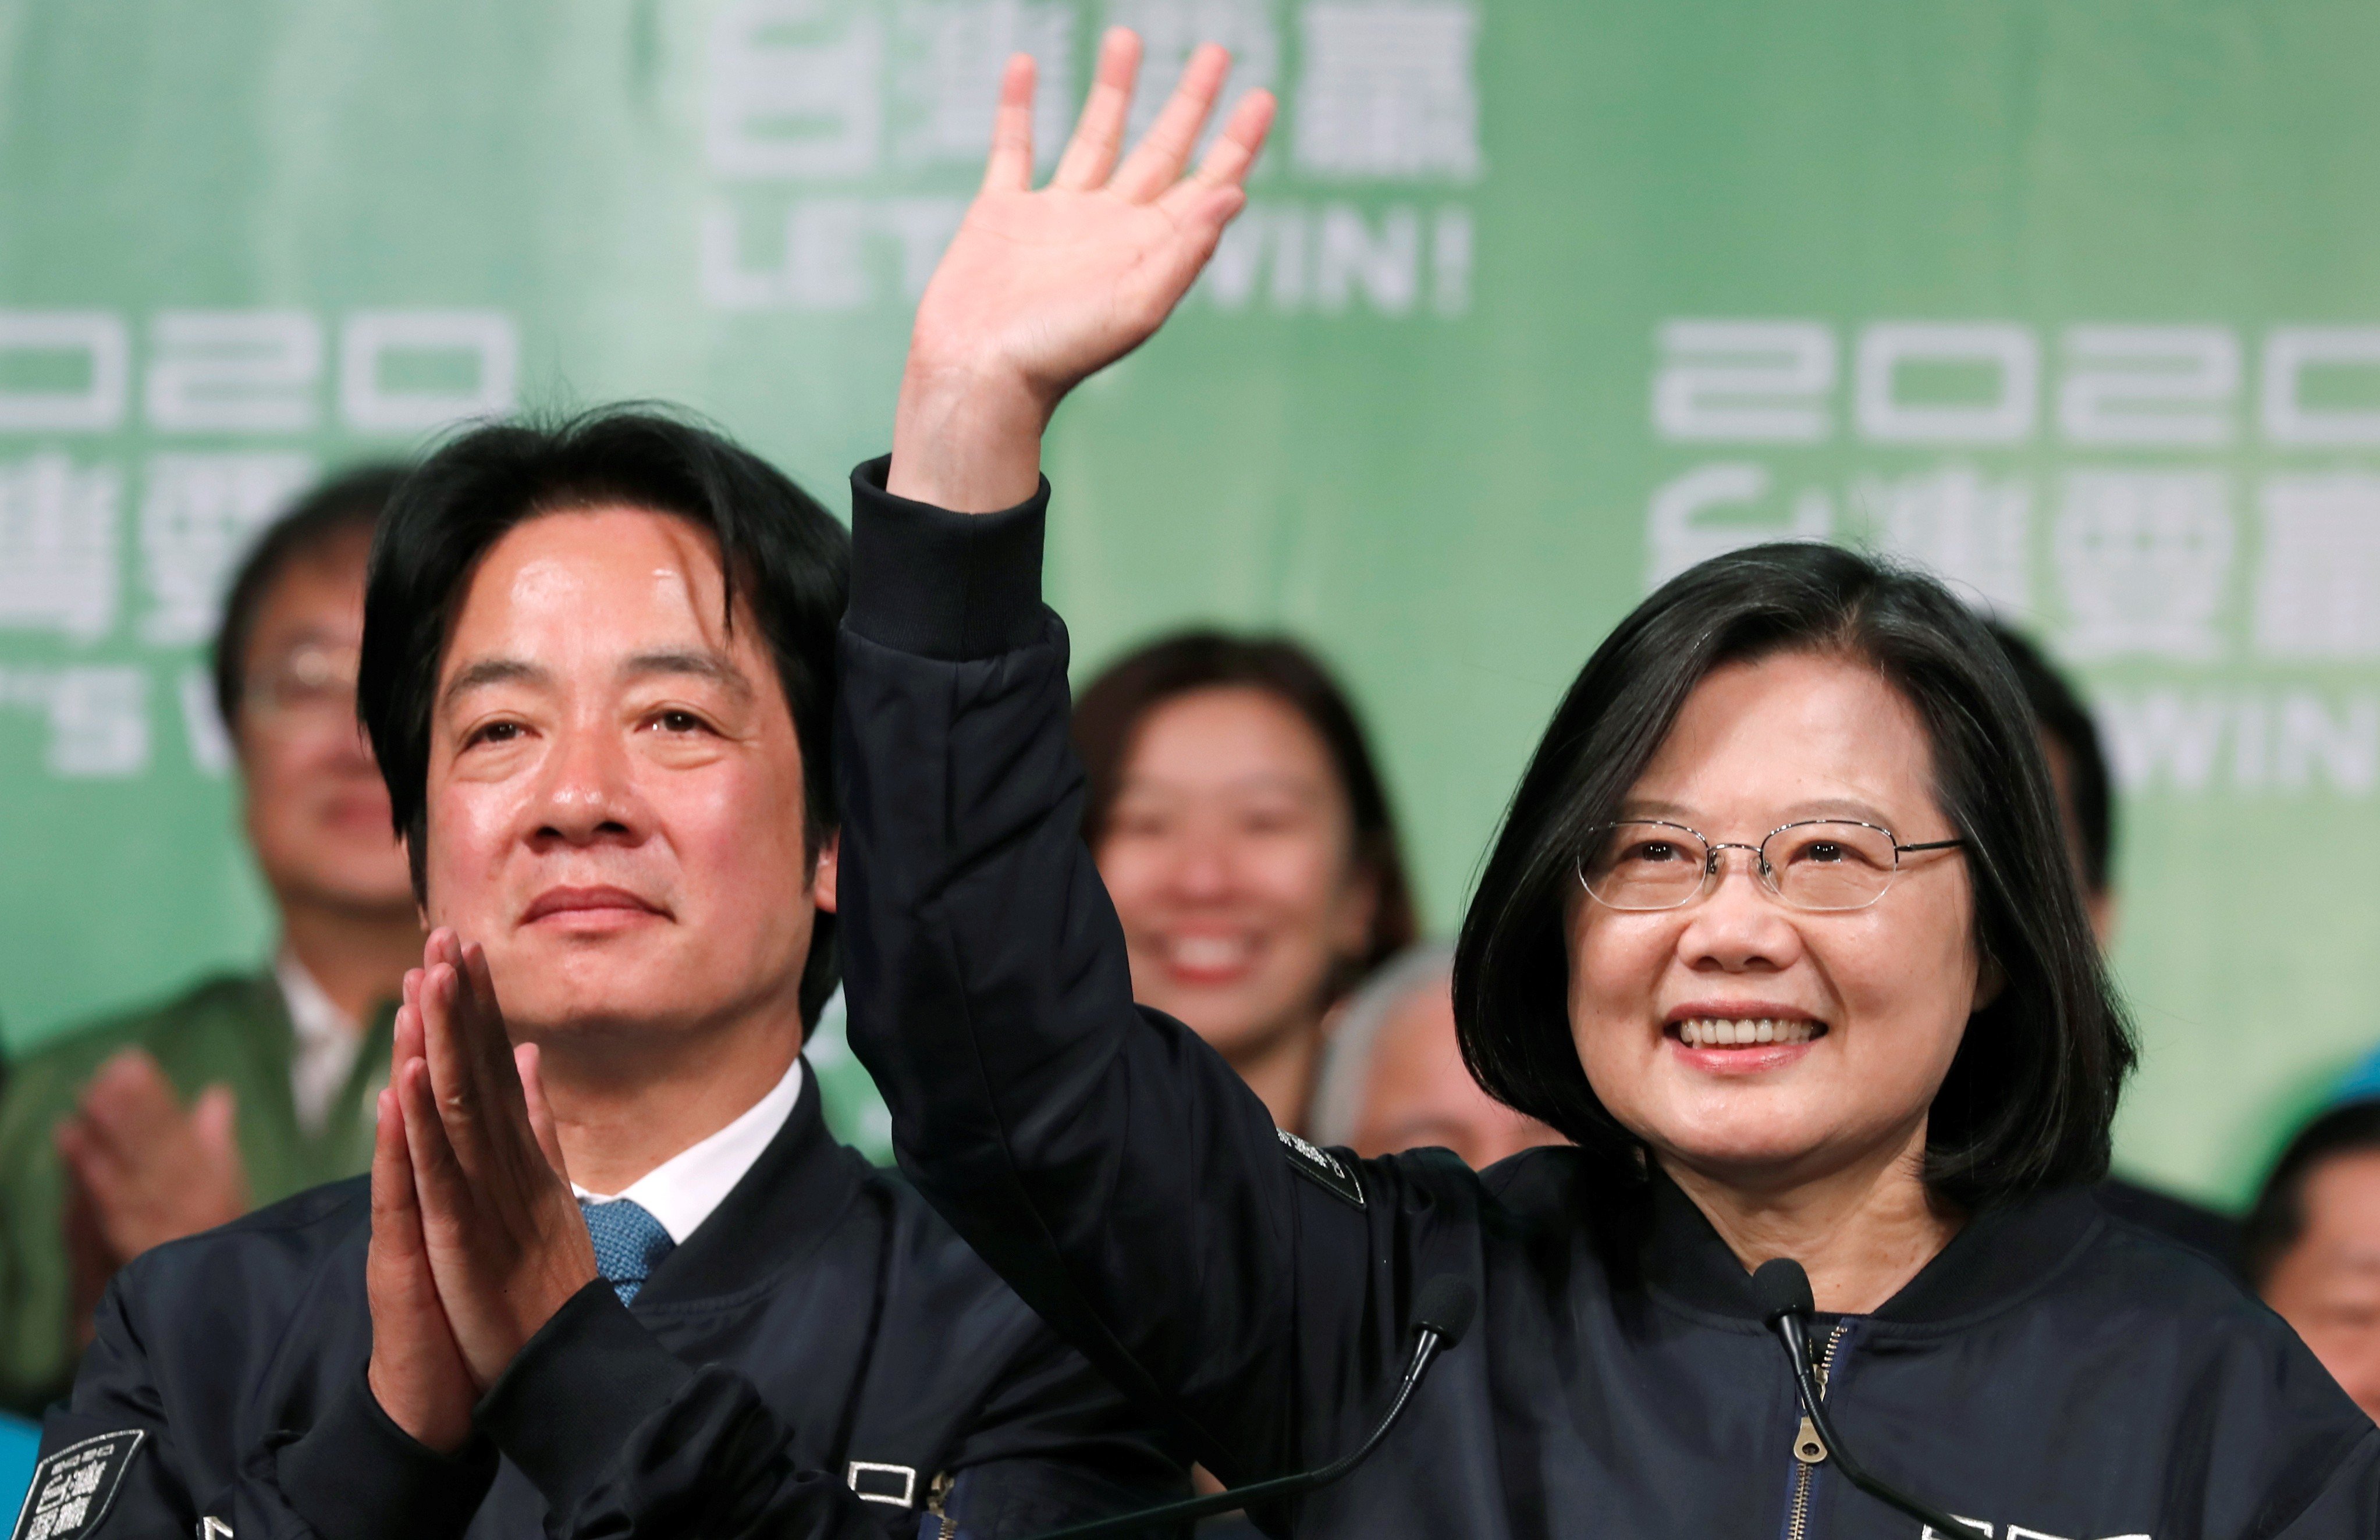 President Tsai Ing-wen and her running mate William Lai thank supporters at a victory rally in Taipei on Saturday. Photo: Reuters